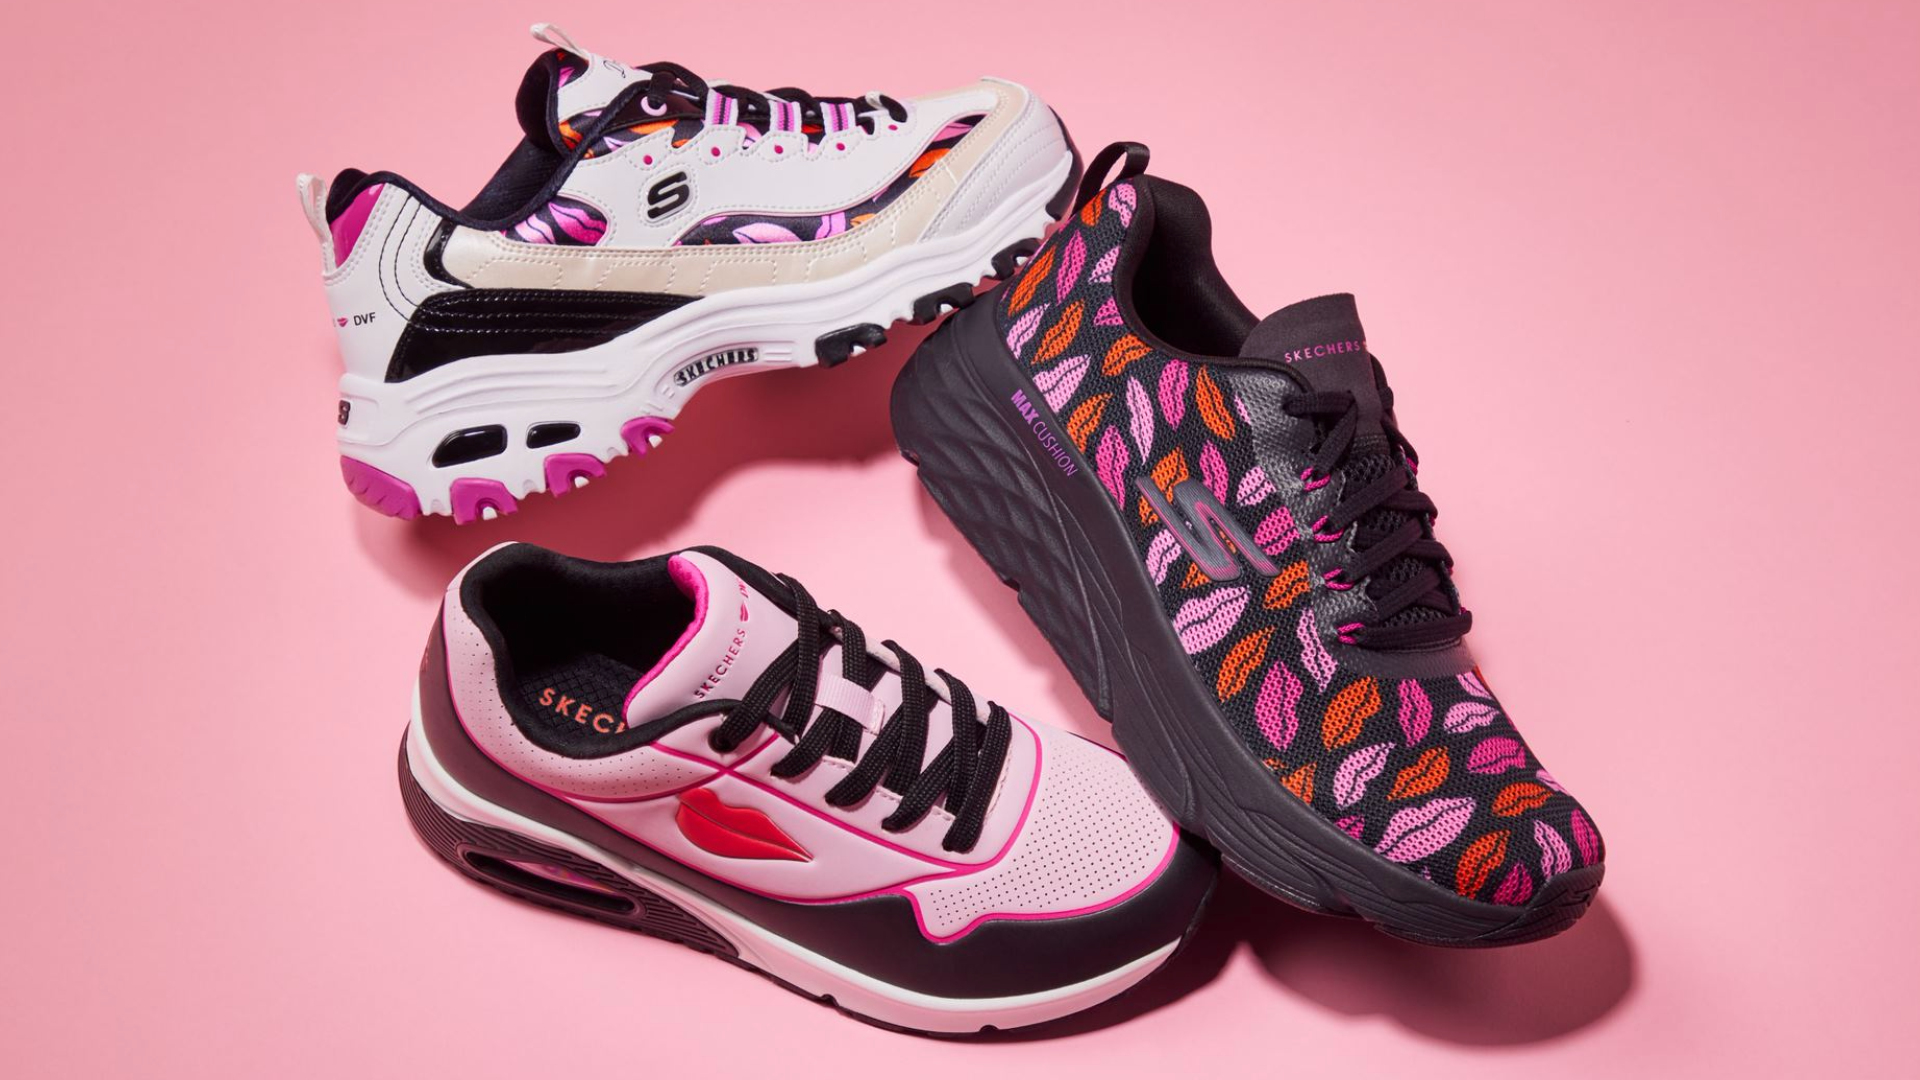 Launched globally, Skechers and Diane von Furstenberg was the epitome of high-low crossover earlier this year. Photo: DVF x Skechers